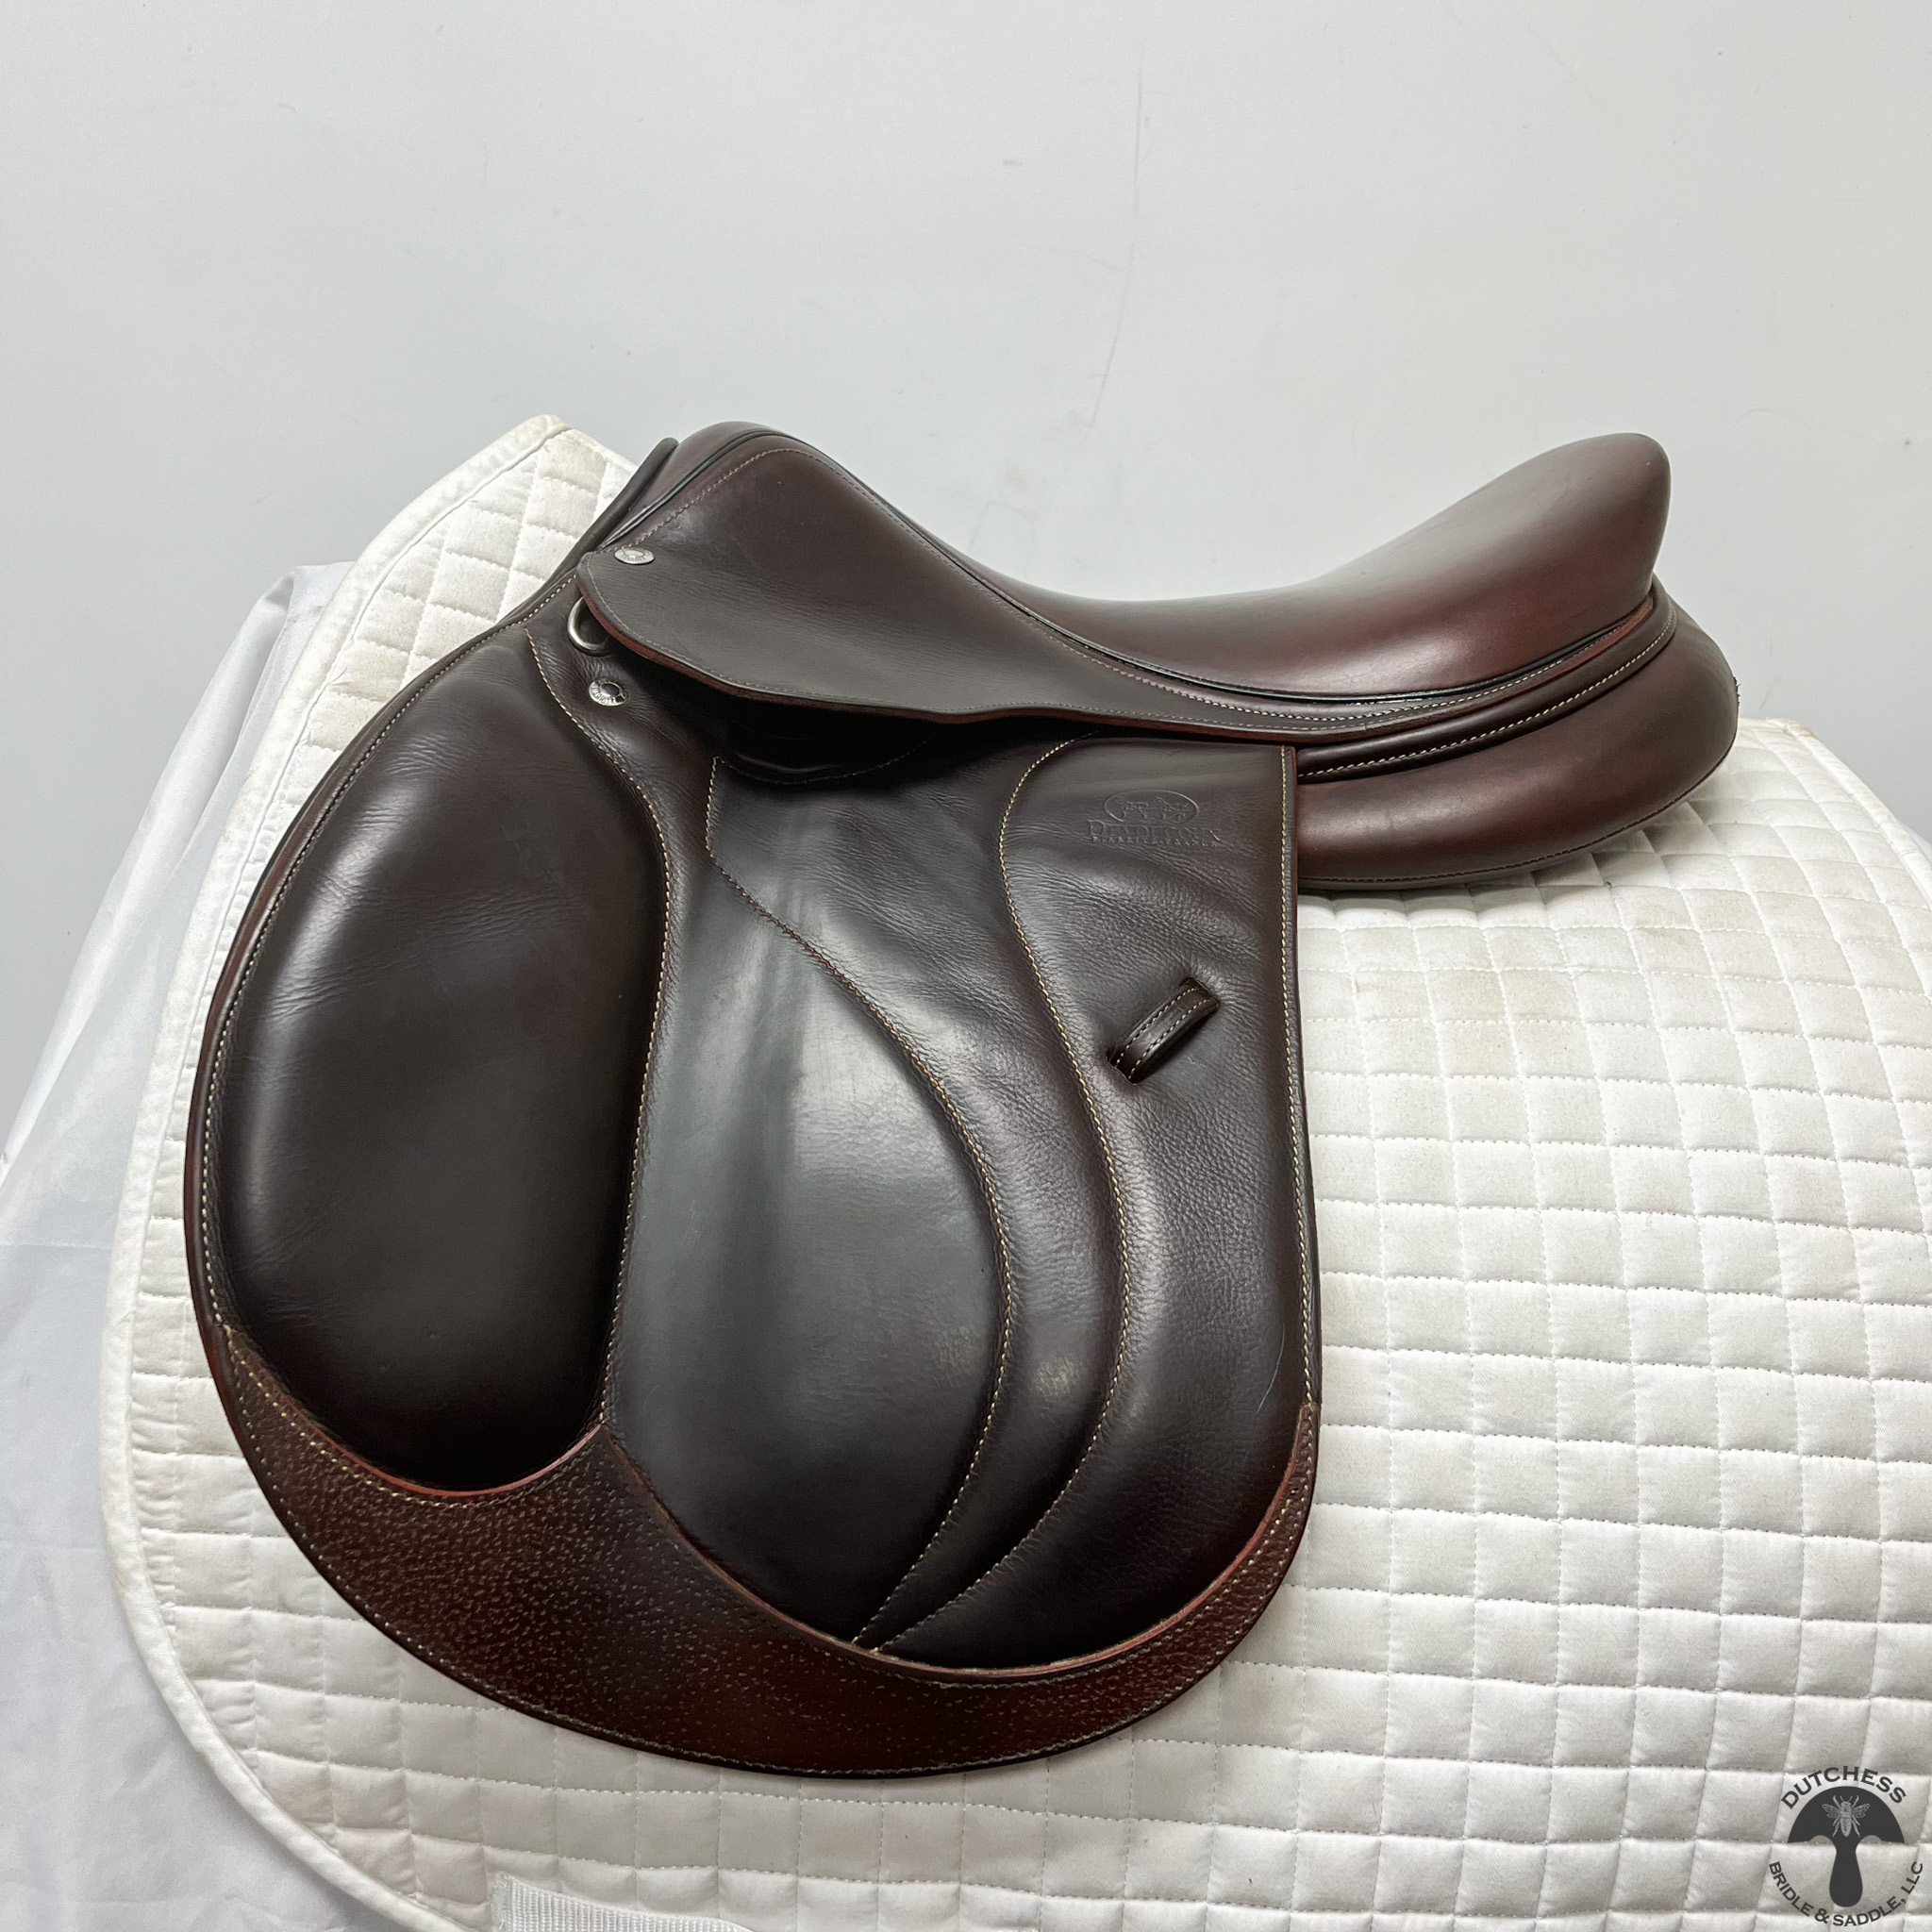 A Devoucoux Biarritz O Jump Saddle 2176 on top of a white blanket.